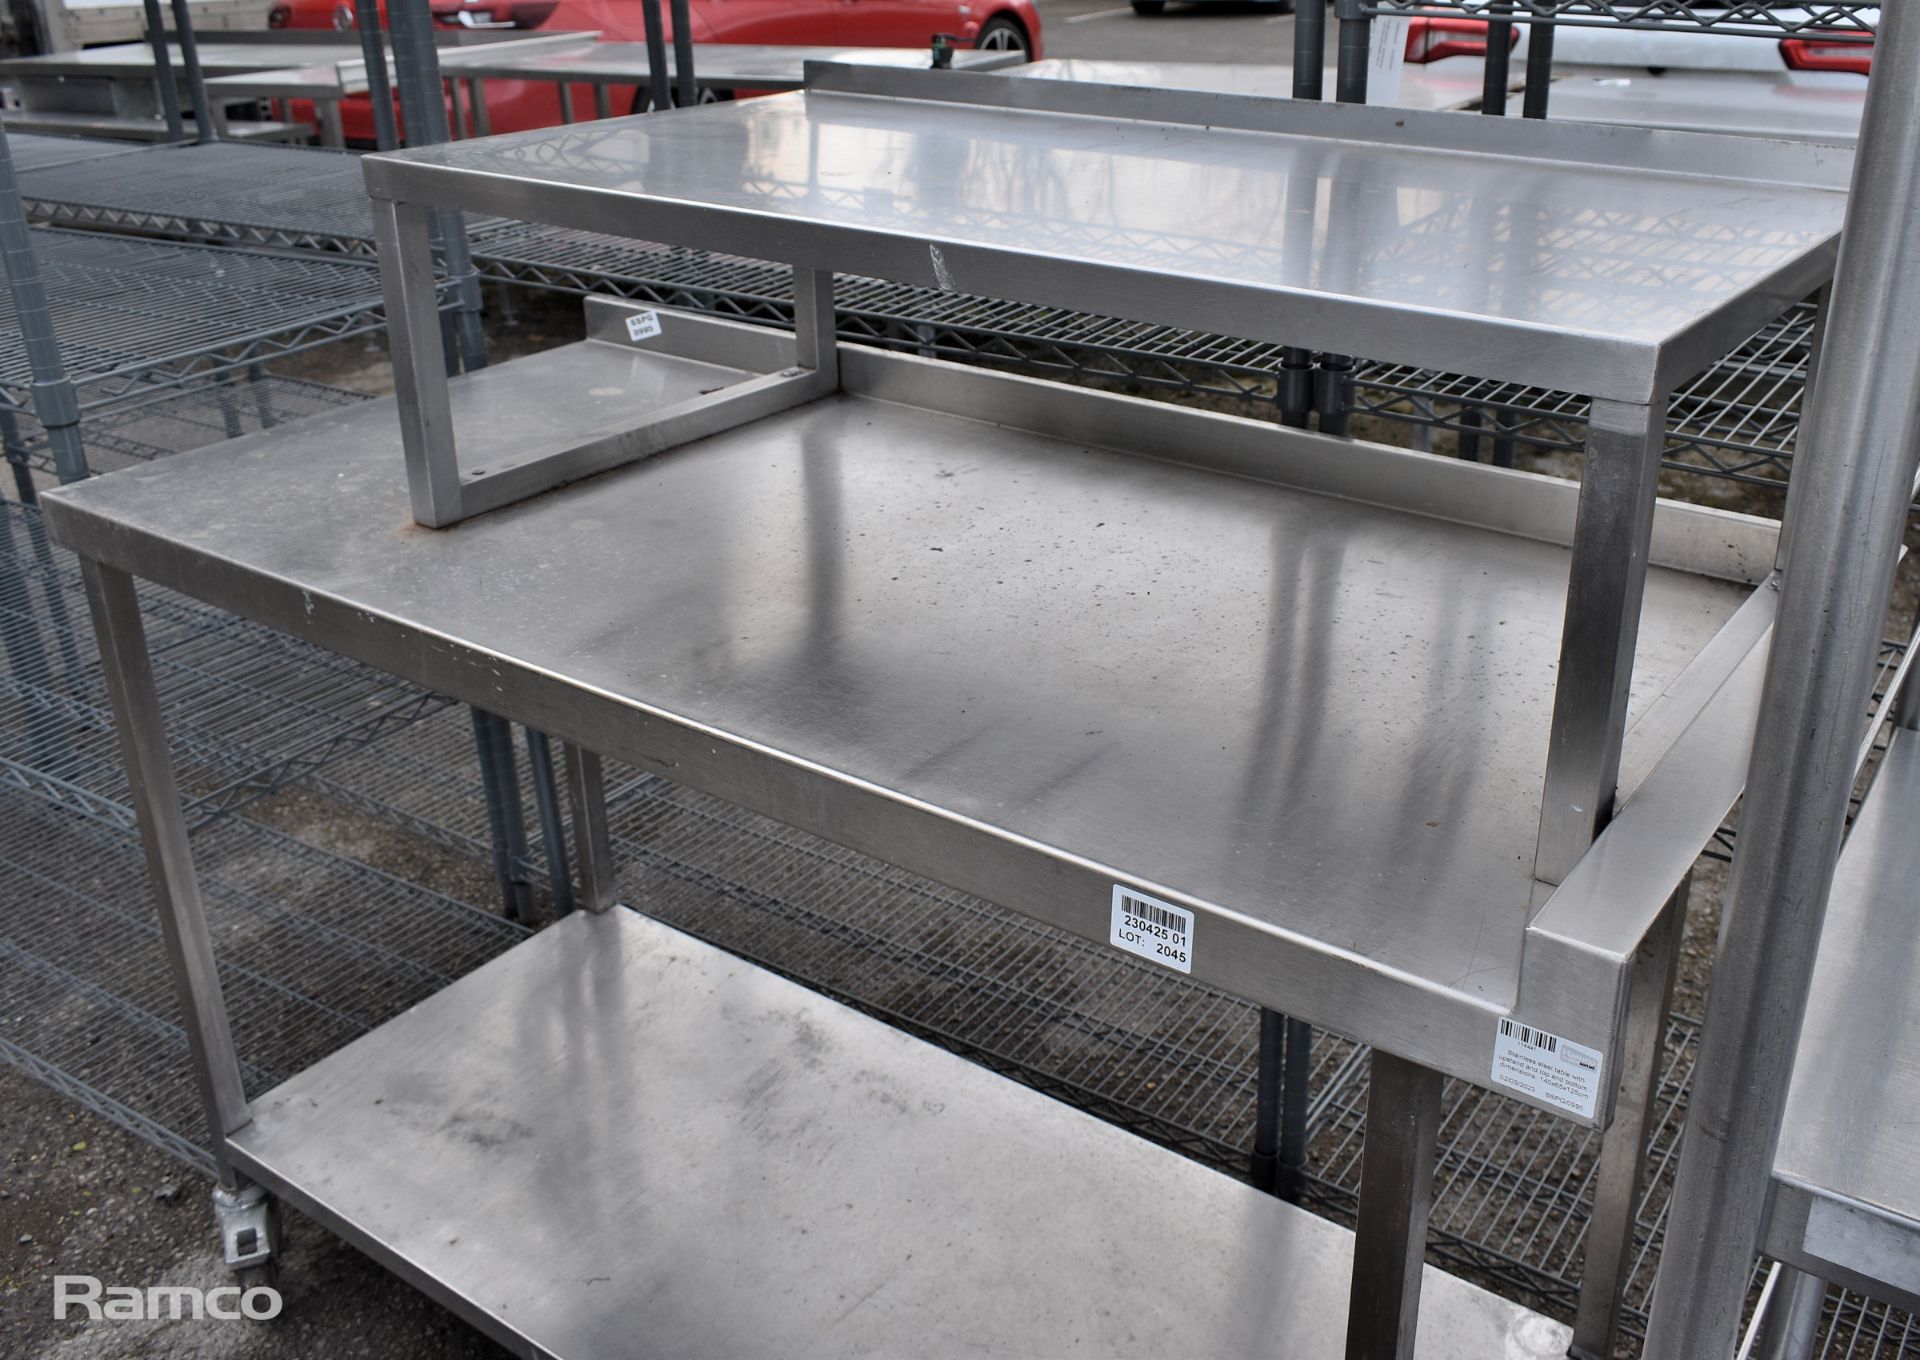 Stainless steel table with upstand and top and bottom - dimensions: 140 x 65 x 125cm - Image 2 of 4